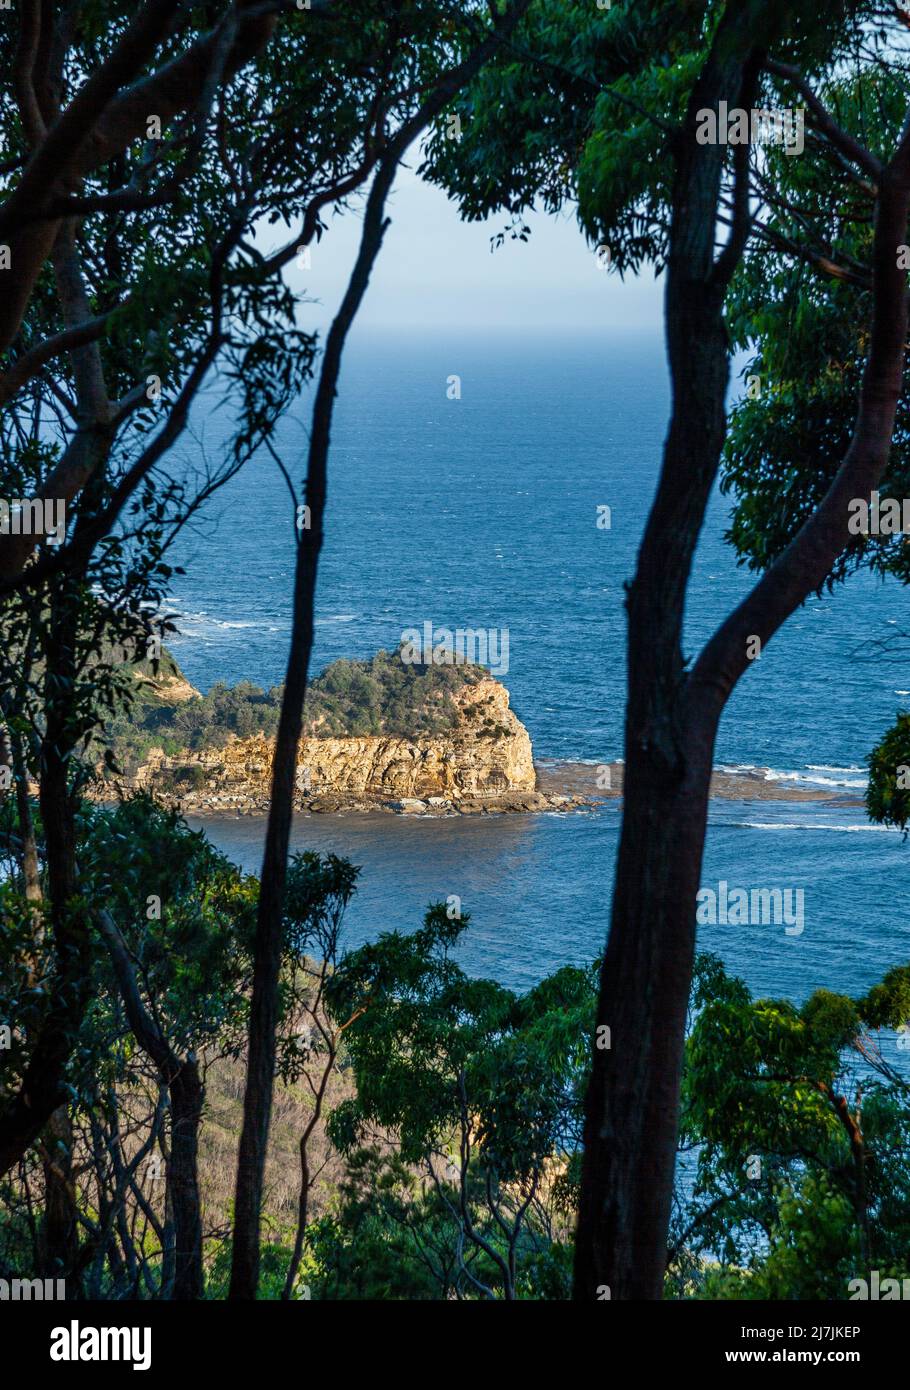 view of the sandstone headland of Bouddi Point at Maitland Bay in Bouddi National Park on the Central Coast of New South Wales, Australia Stock Photo